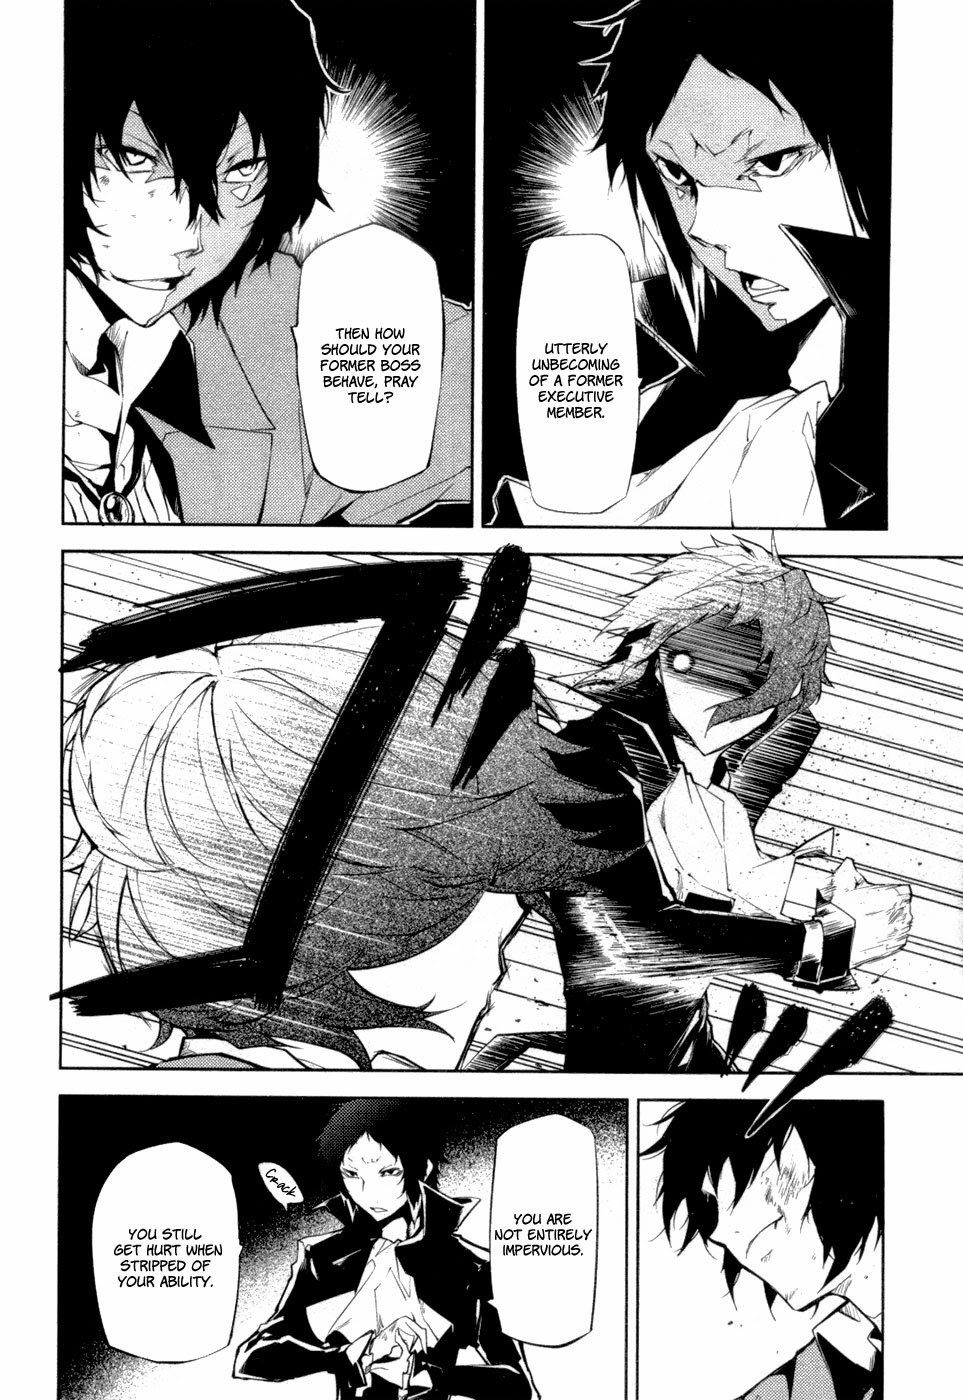 Bungo Stray Dogs chapter 9 page 22